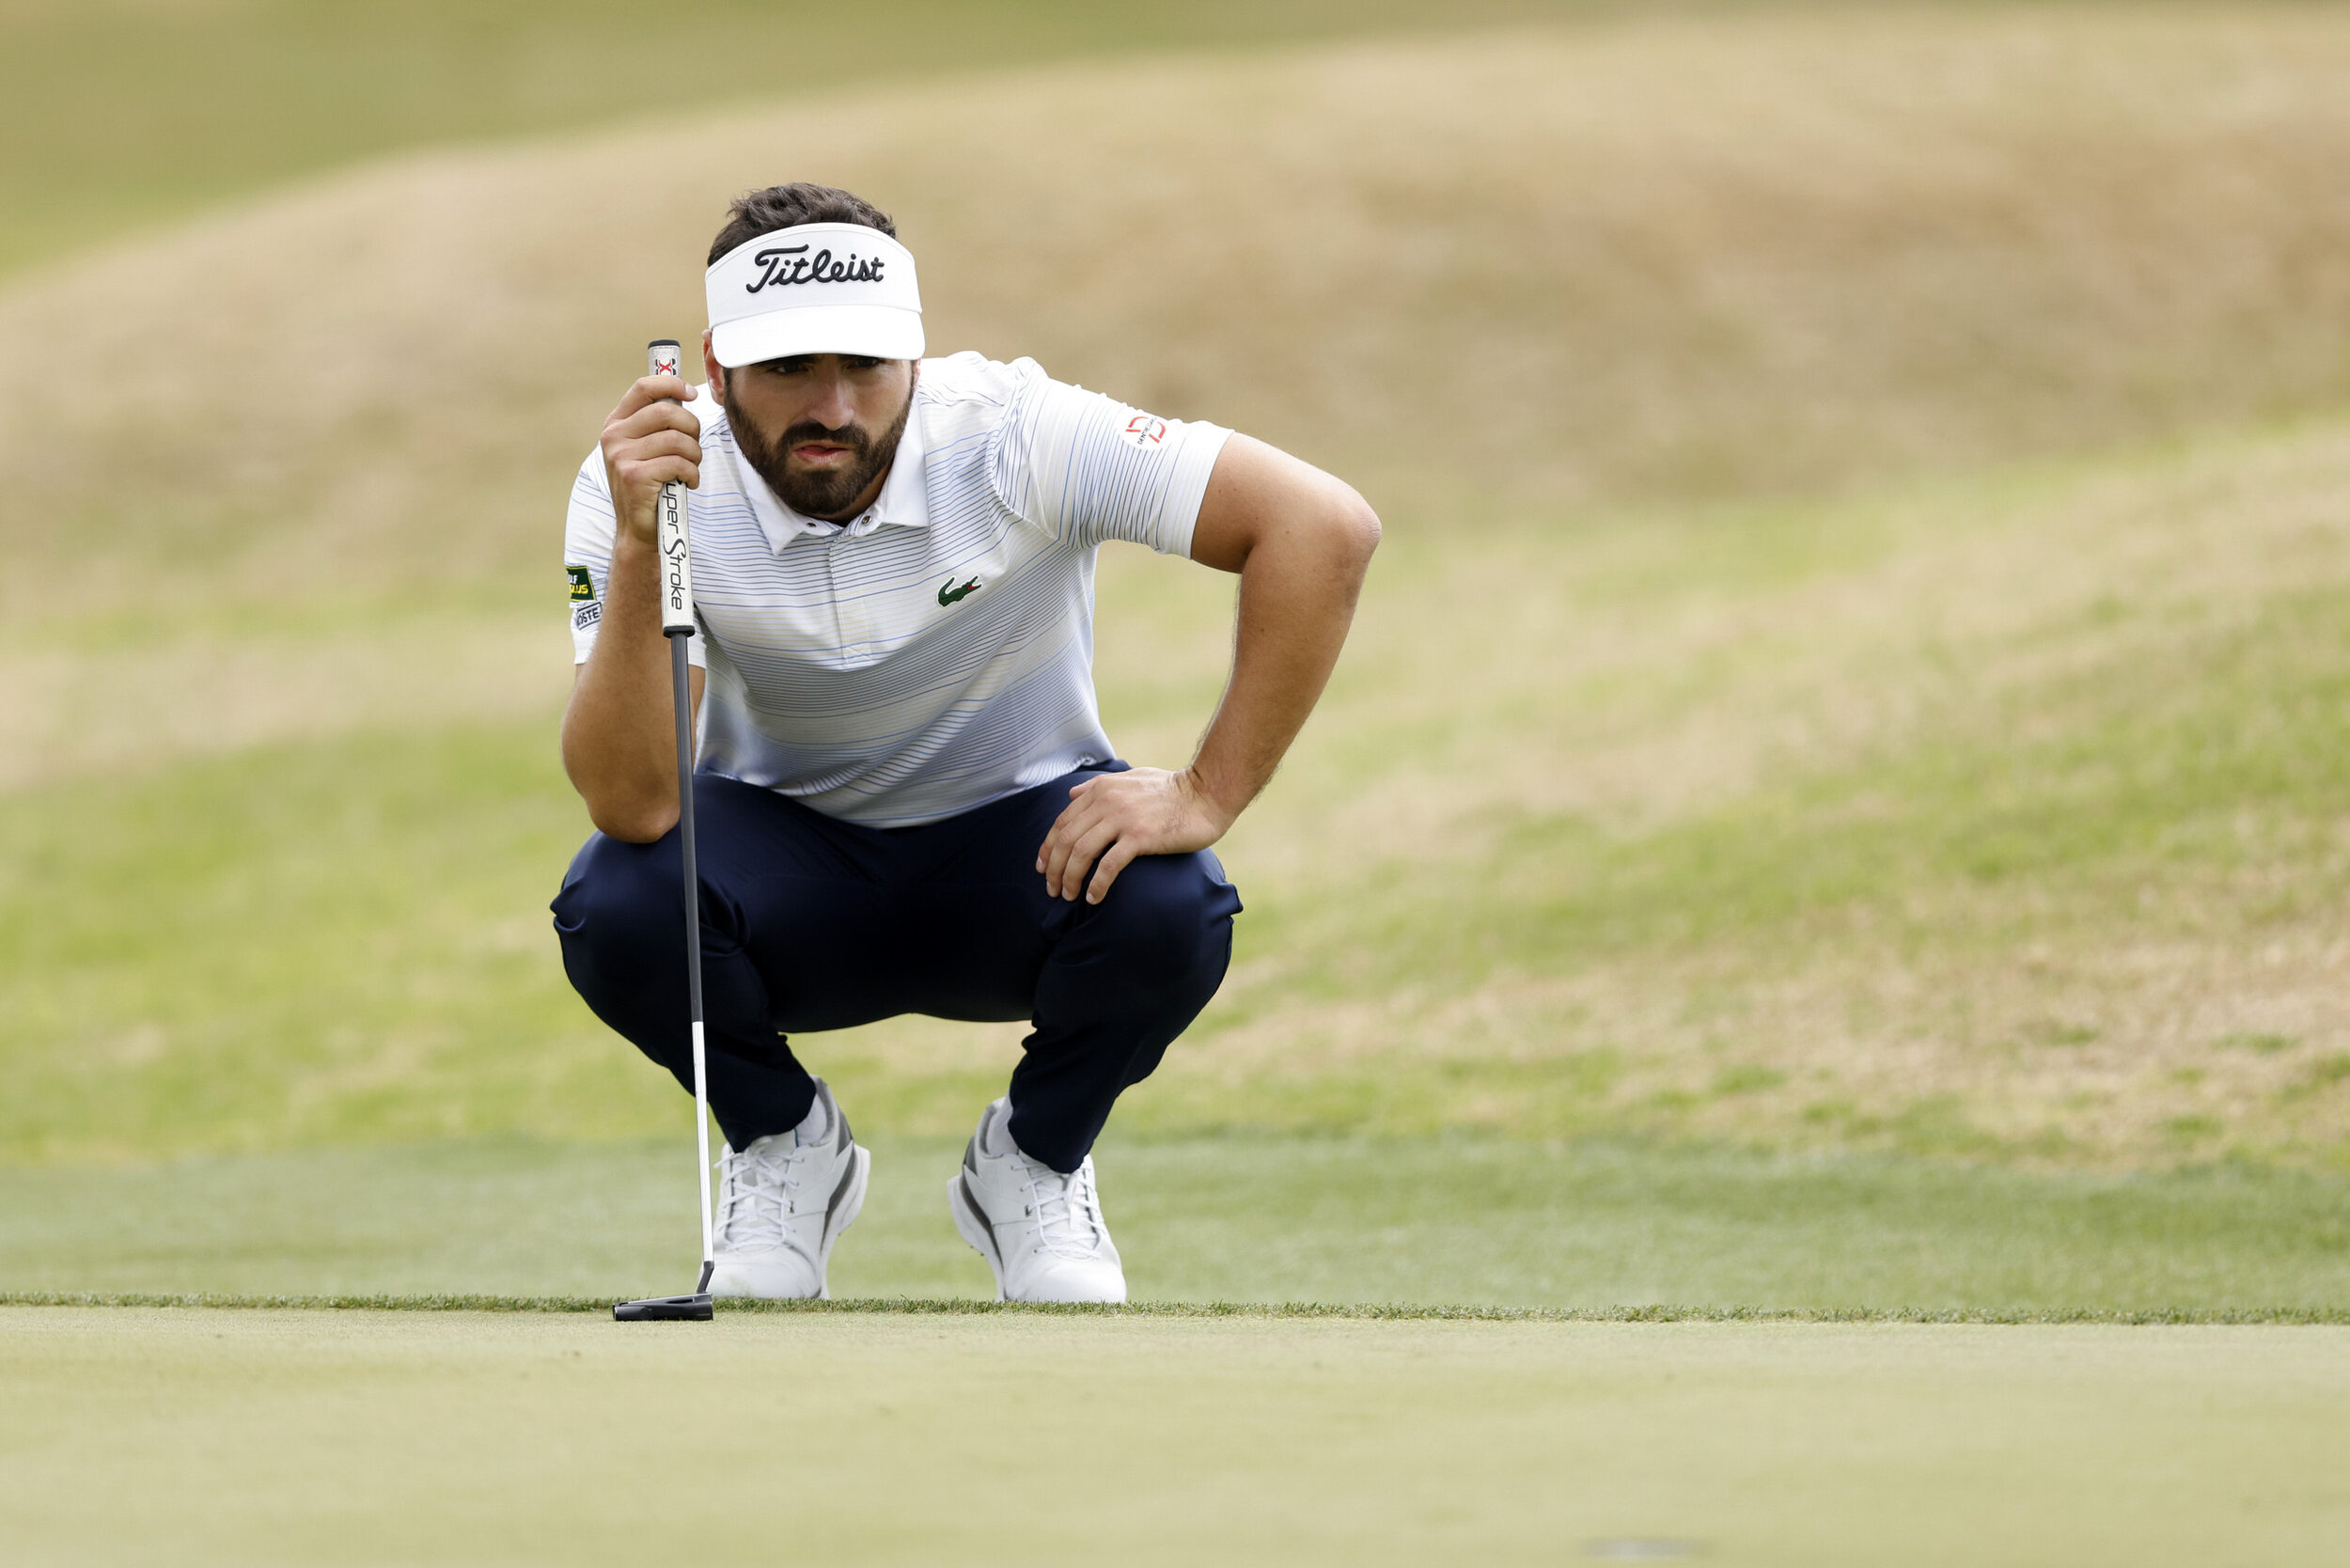  AUSTIN, TEXAS - MARCH 24: Antoine Rozner of France lines up a putt on the 15th green in his match against Bryson DeChambeau of the United States during the first round of the World Golf Championships-Dell Technologies Match Play at Austin Country Cl